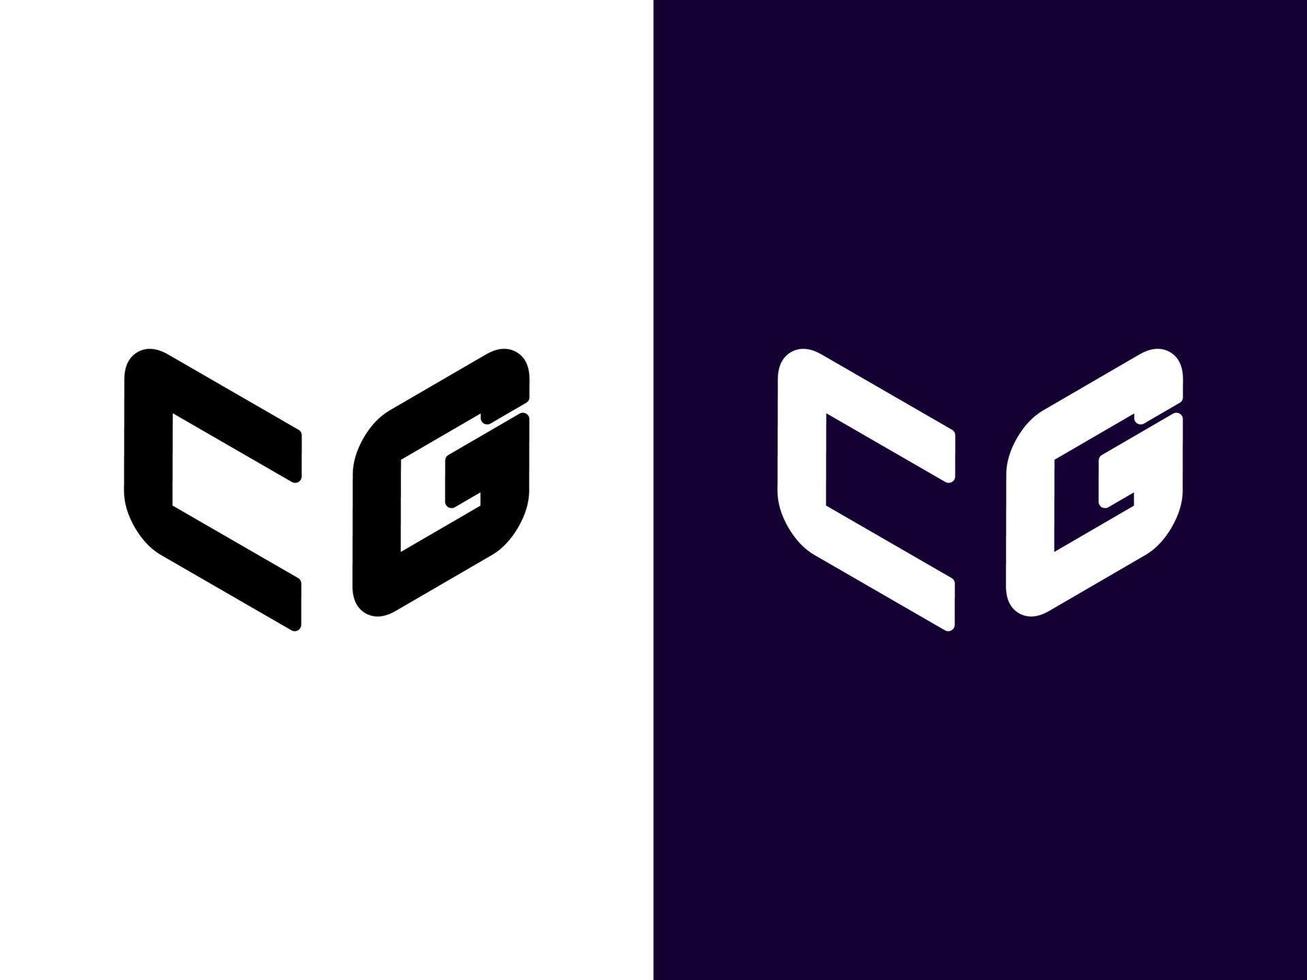 Initial letter CG minimalist and modern 3D logo design vector